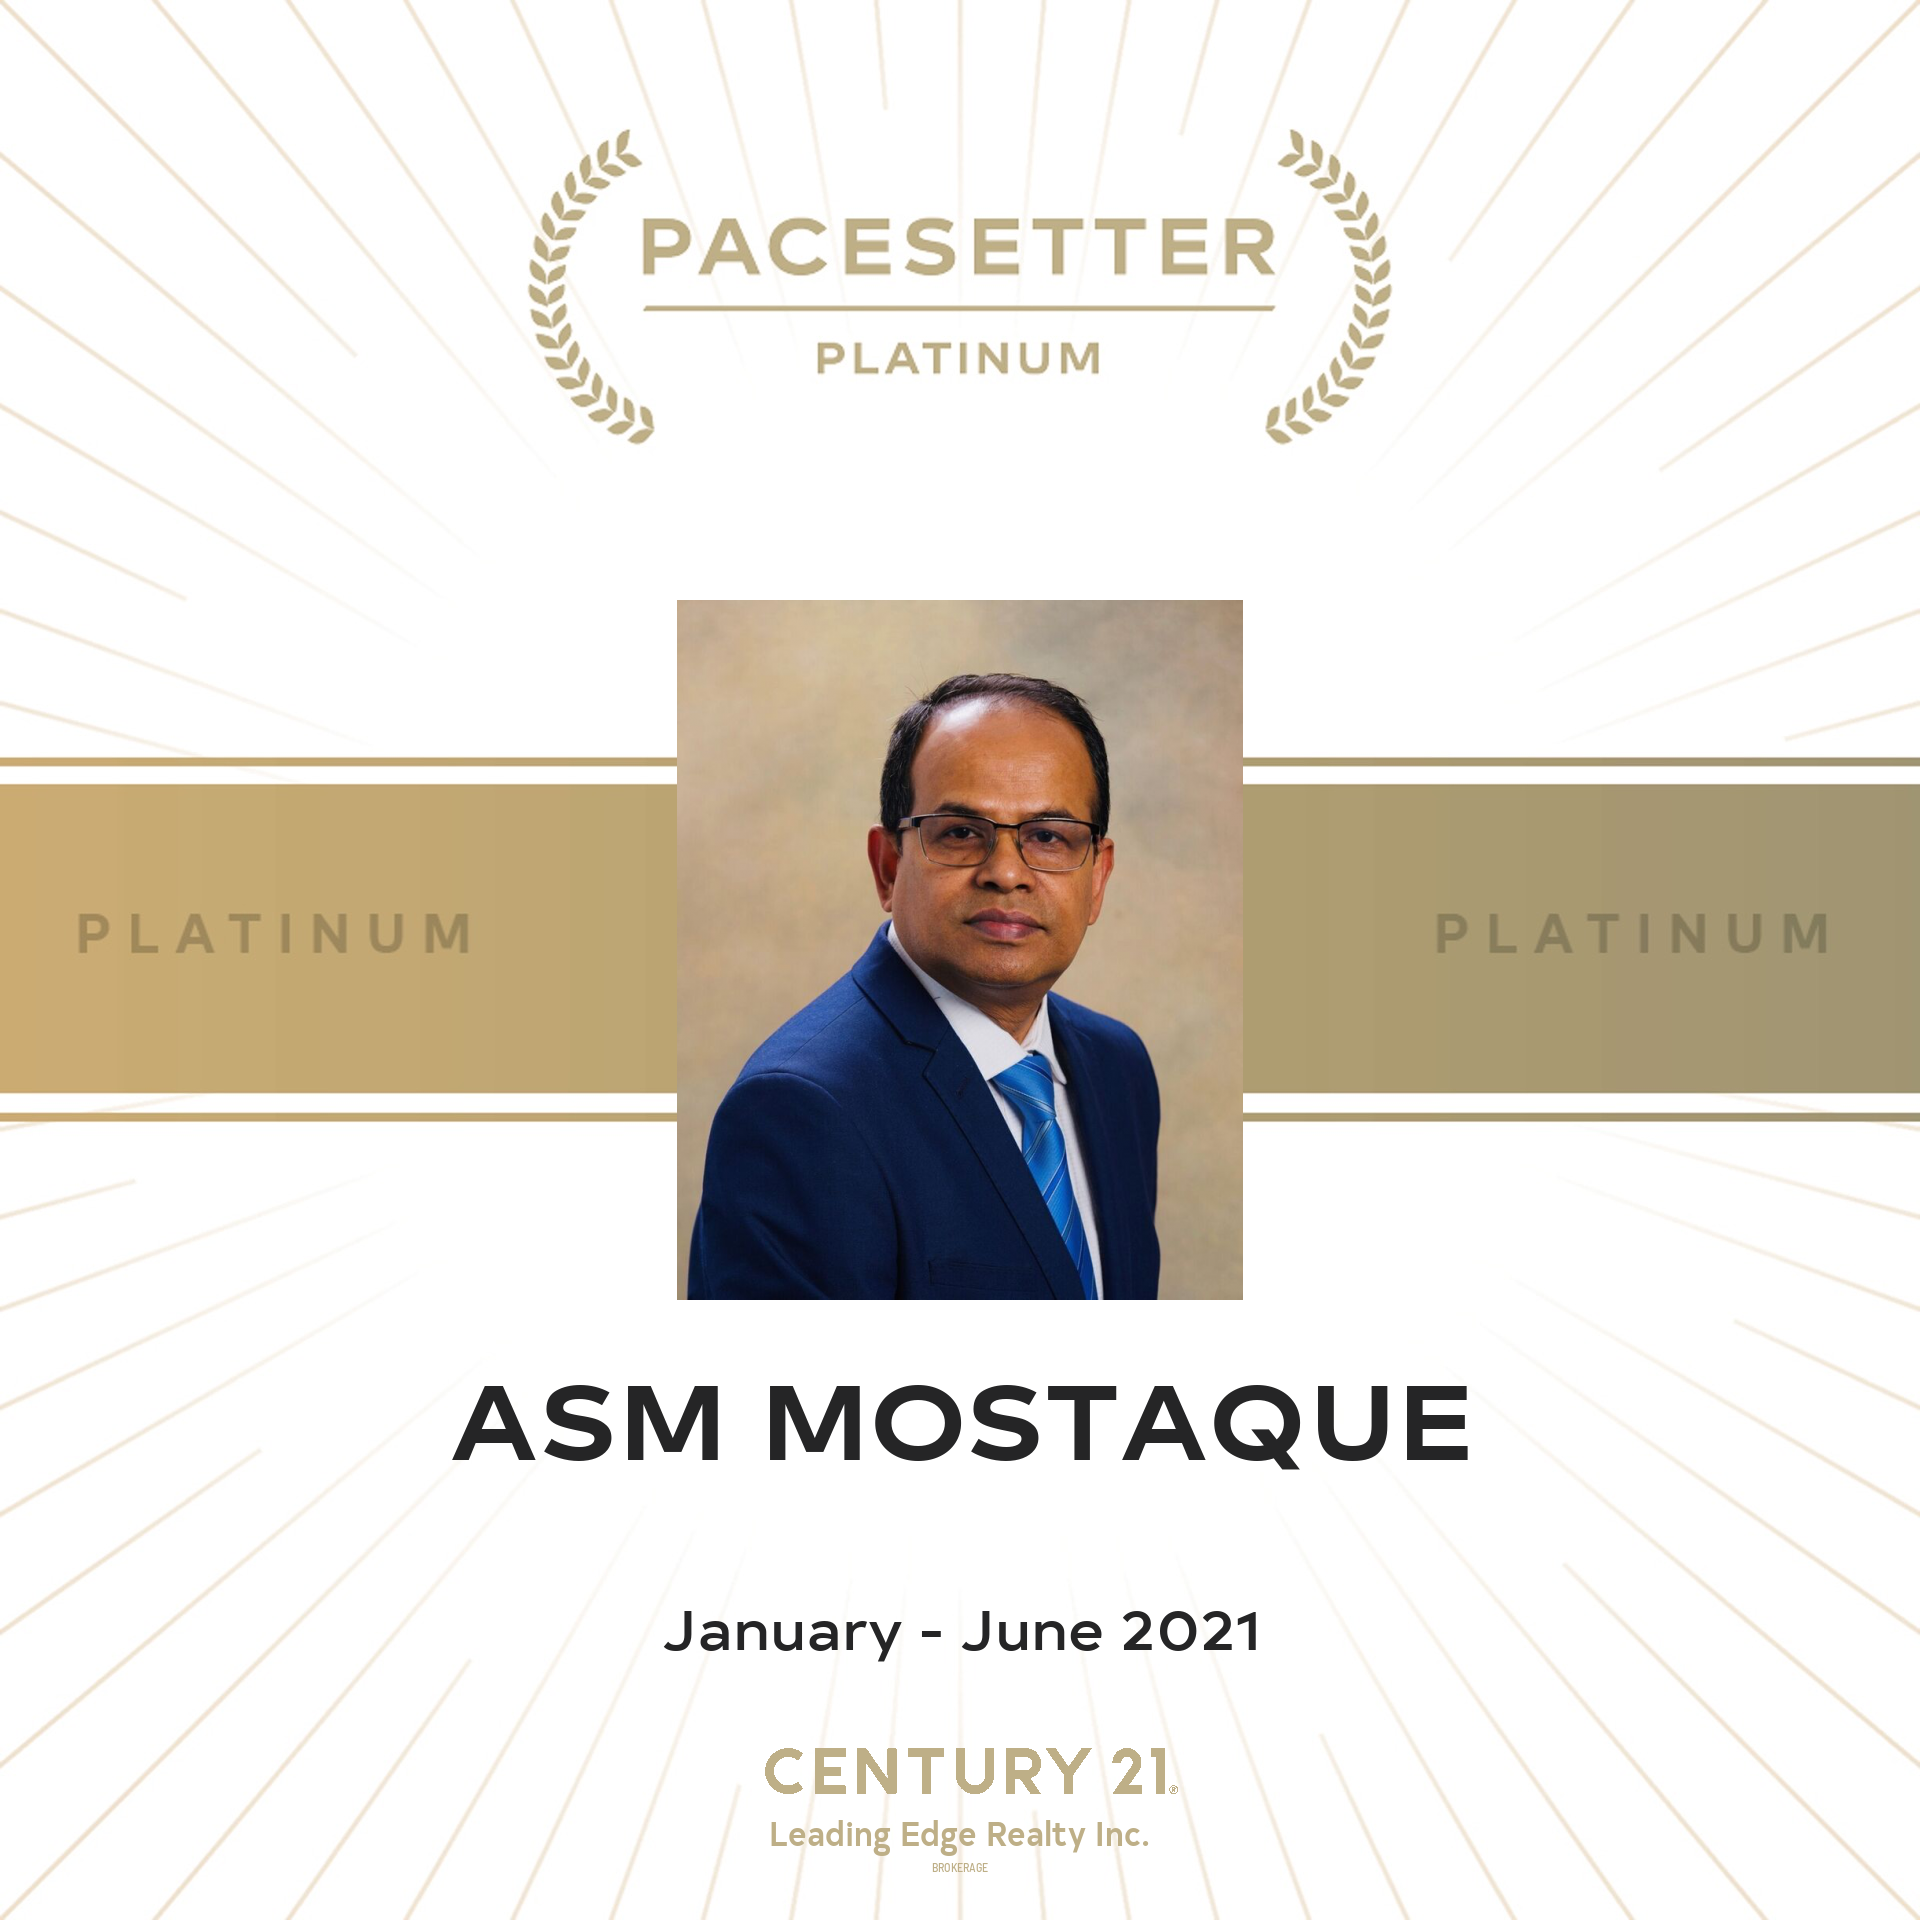 ASM Mostaque Pacesetter